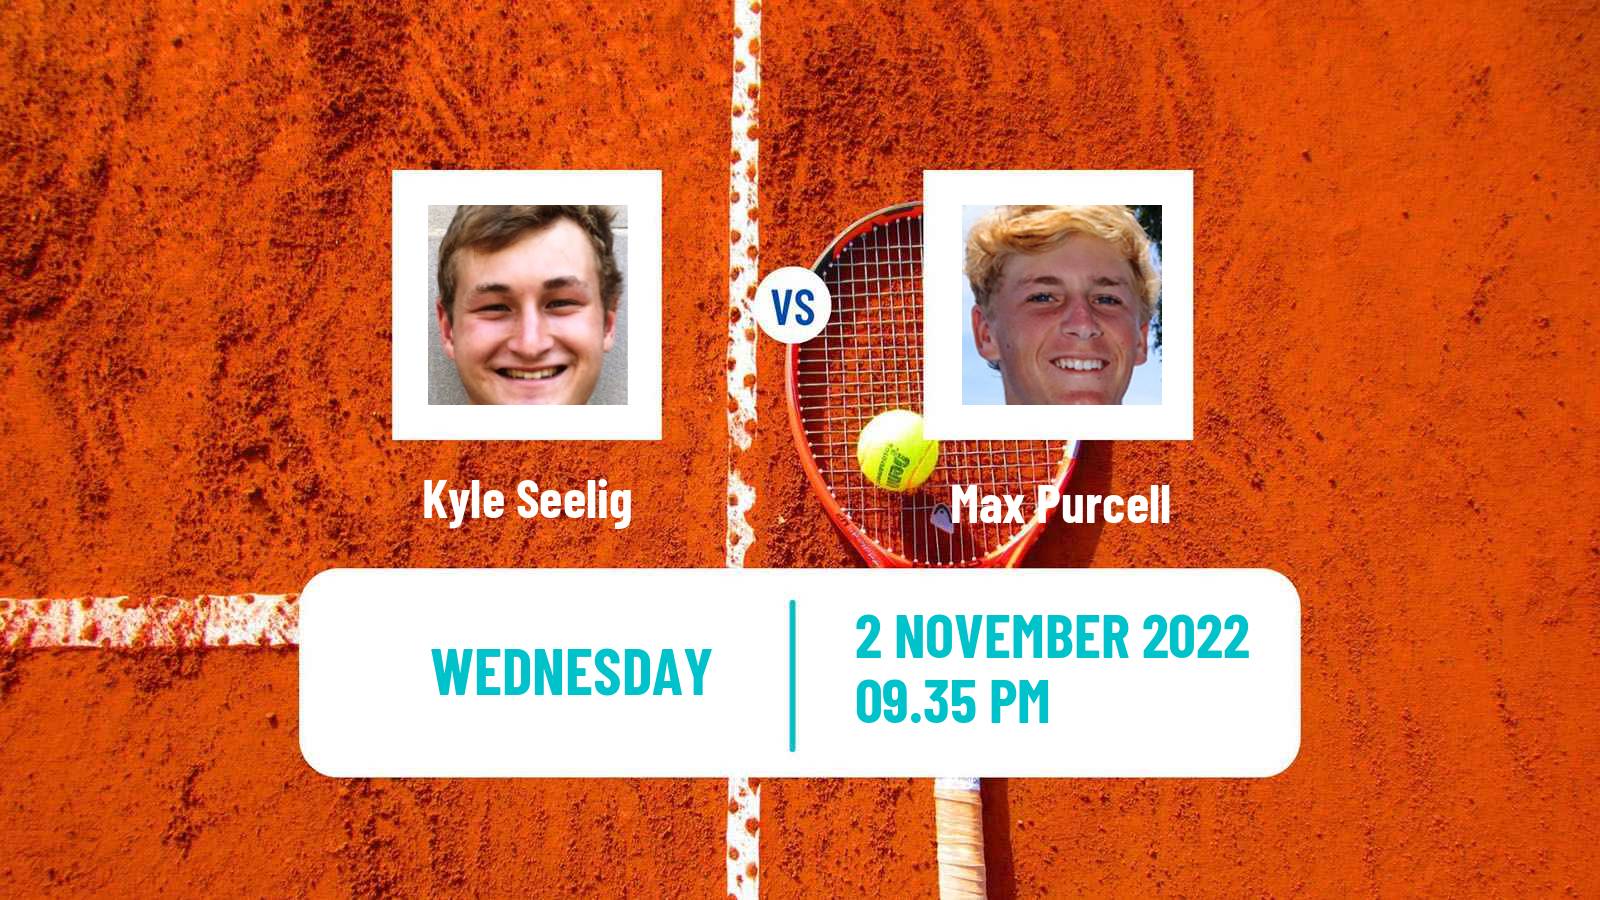 Tennis ATP Challenger Kyle Seelig - Max Purcell